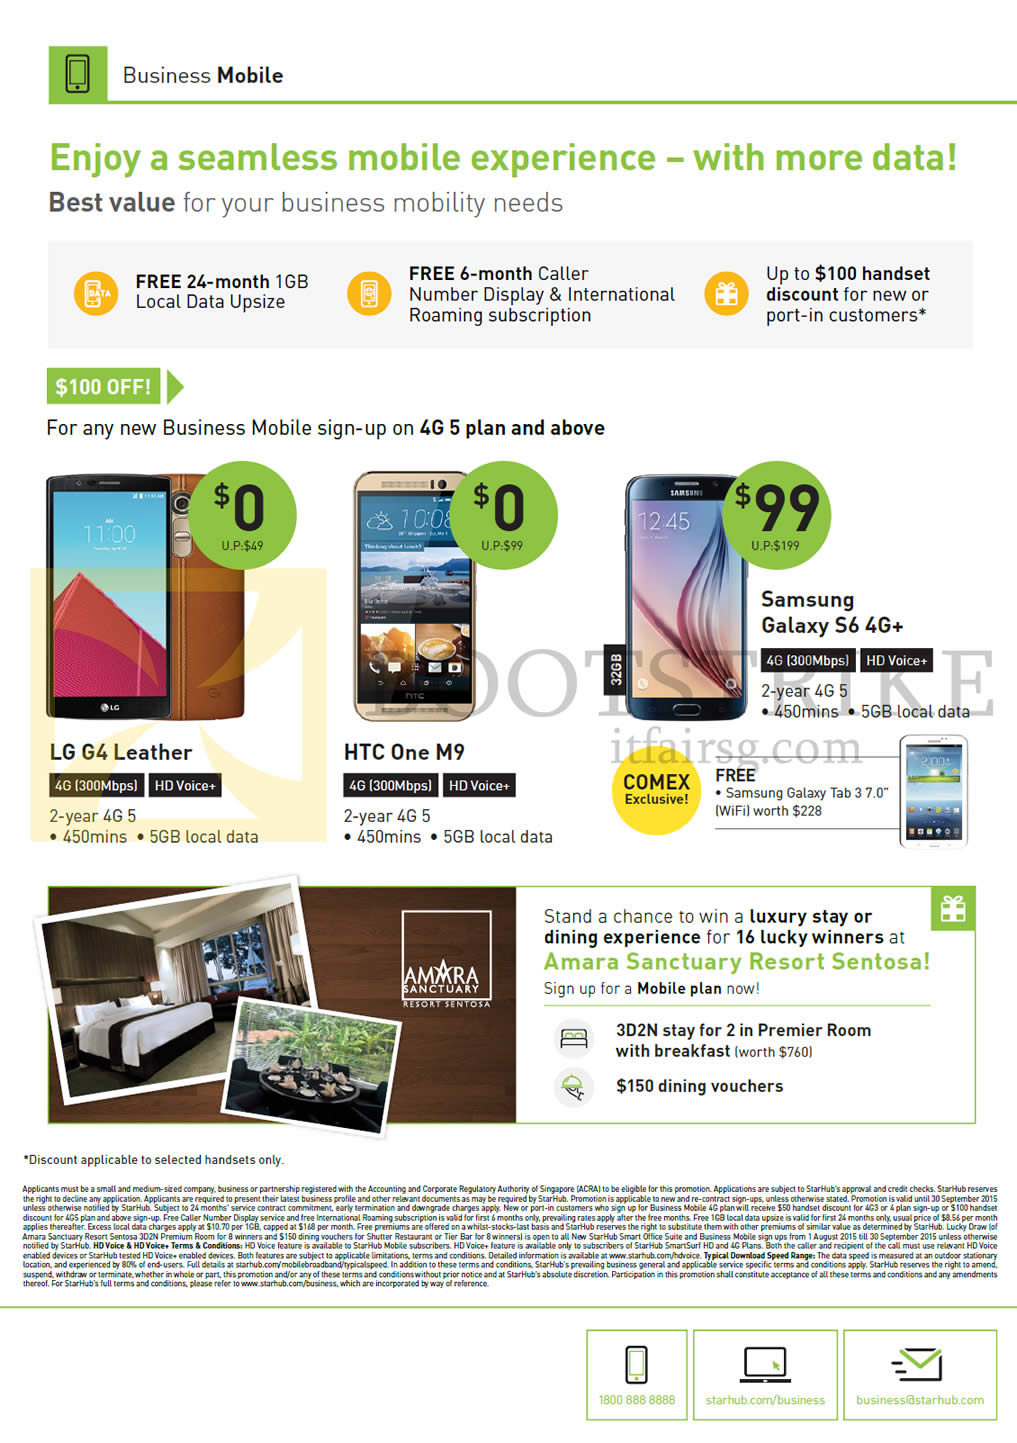 COMEX 2015 price list image brochure of Starhub Business Mobile Phones LG G4 Leather, HTC One M9, Samsung Galaxy S6